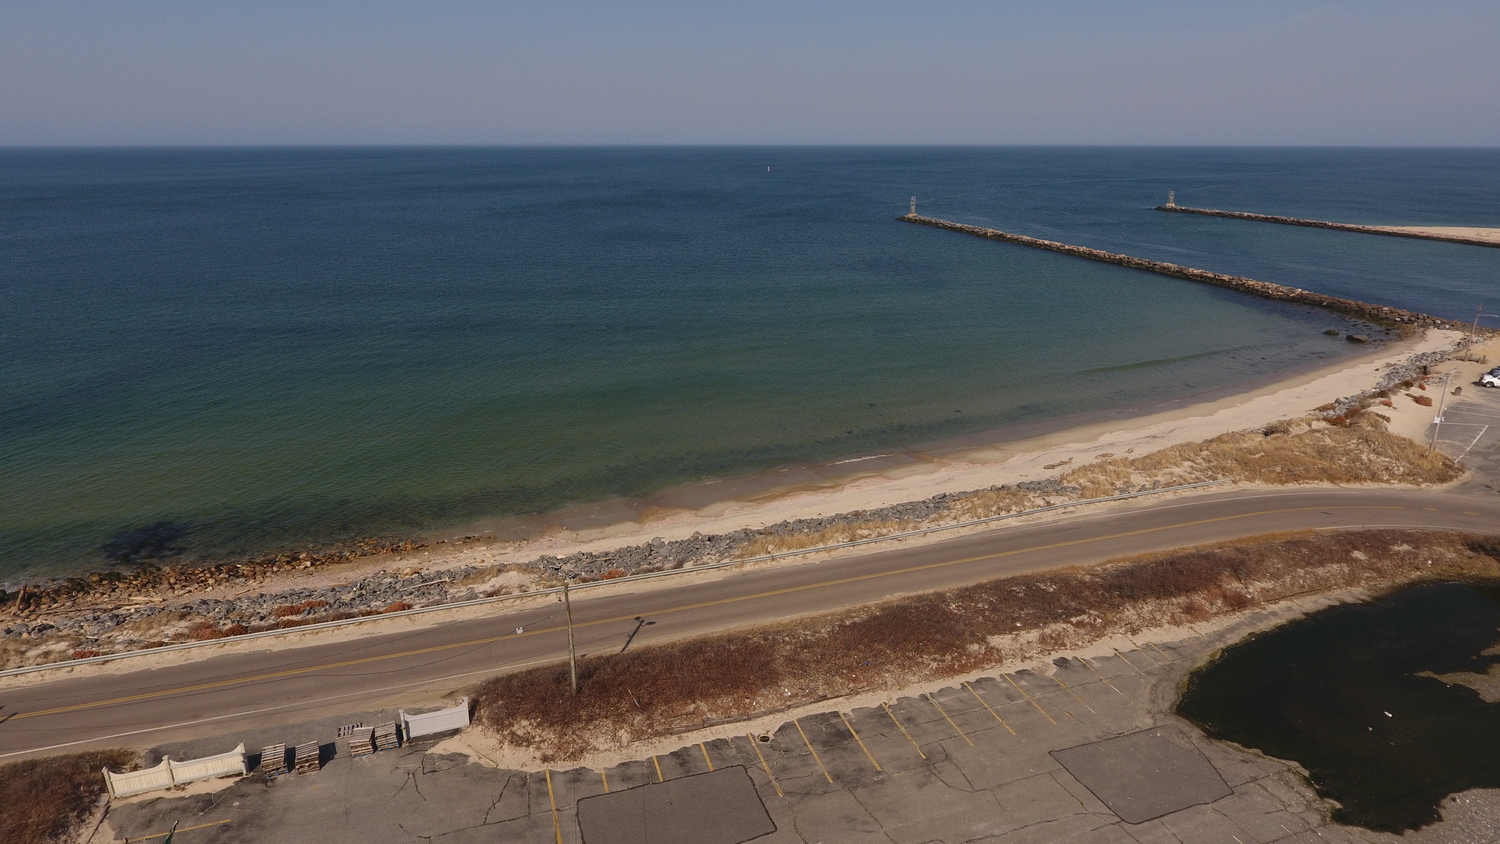 The Army Corps of Engineers is redesigning its plans for dredging Montauk Inlet and says that it will only be able to rebuild about 1,200 feet of beach west of the inlet with the sand taken out of the inlet, rather than more than 3,000 feet it had hoped. Surveys of the shoal inside the inlet revealed that large boulders will make it too difficult to remove sand from an area inside the harbor. MICHAEL WRIGHT